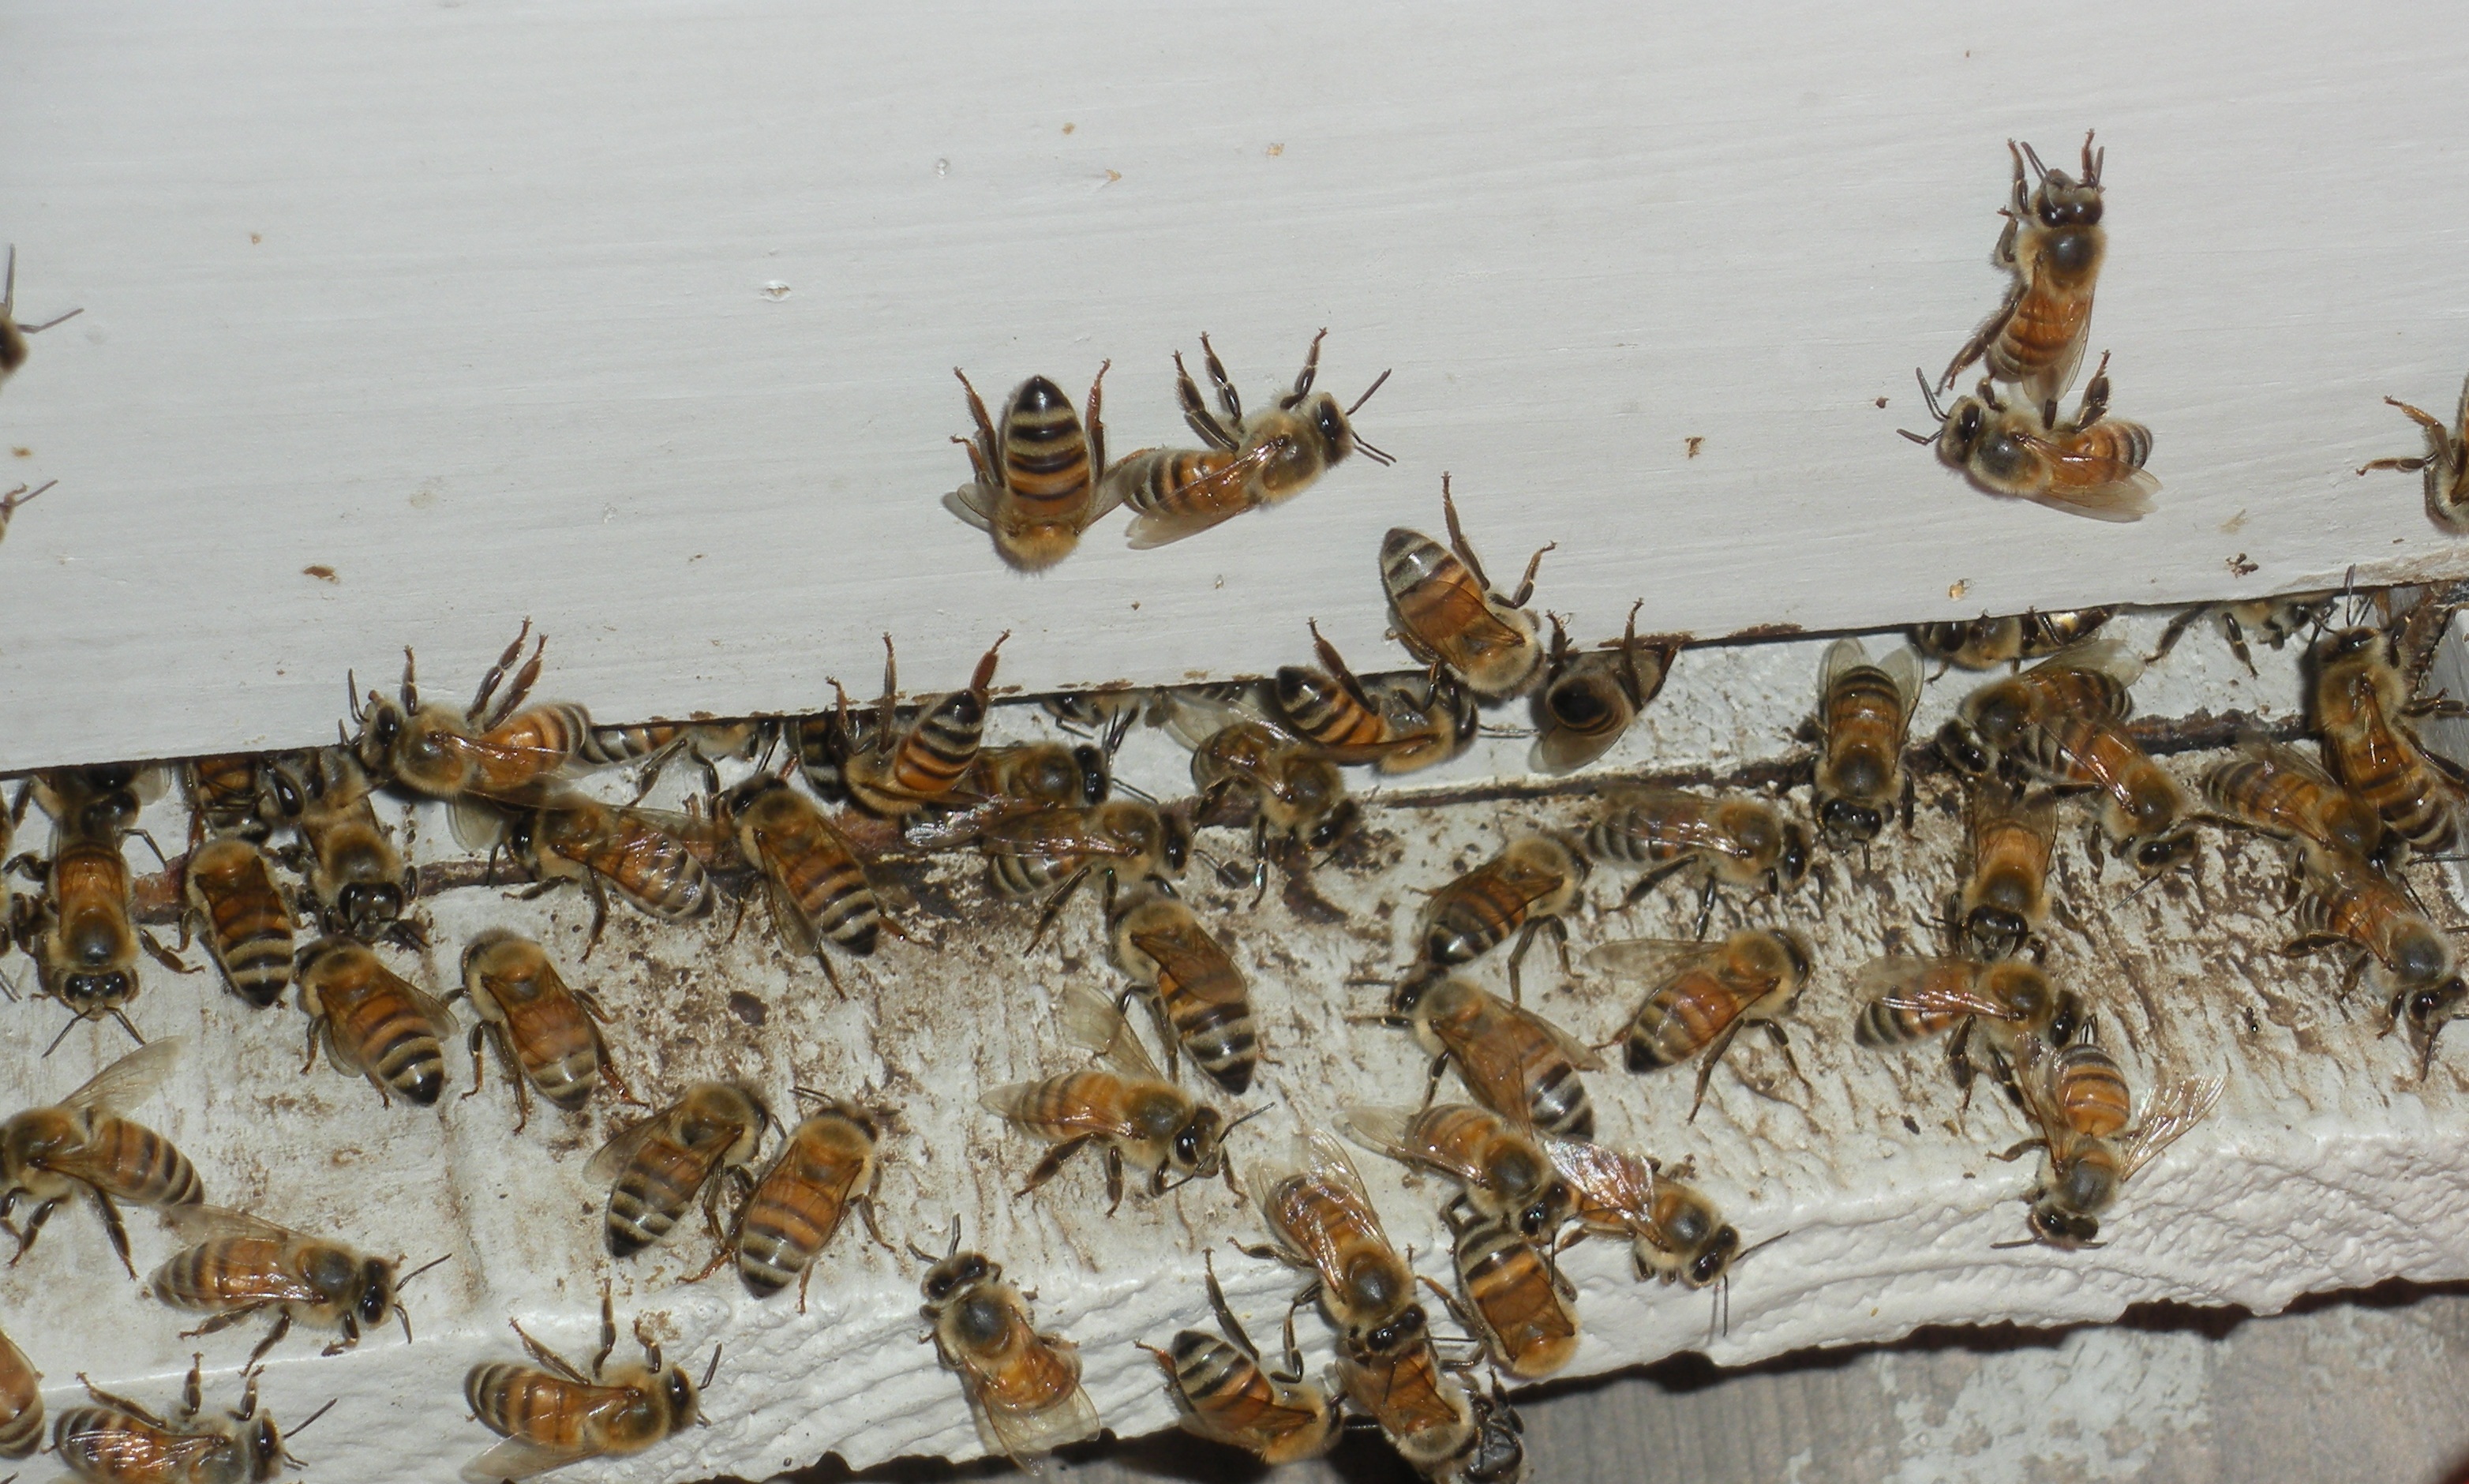 My Honeybees going into there bee hive